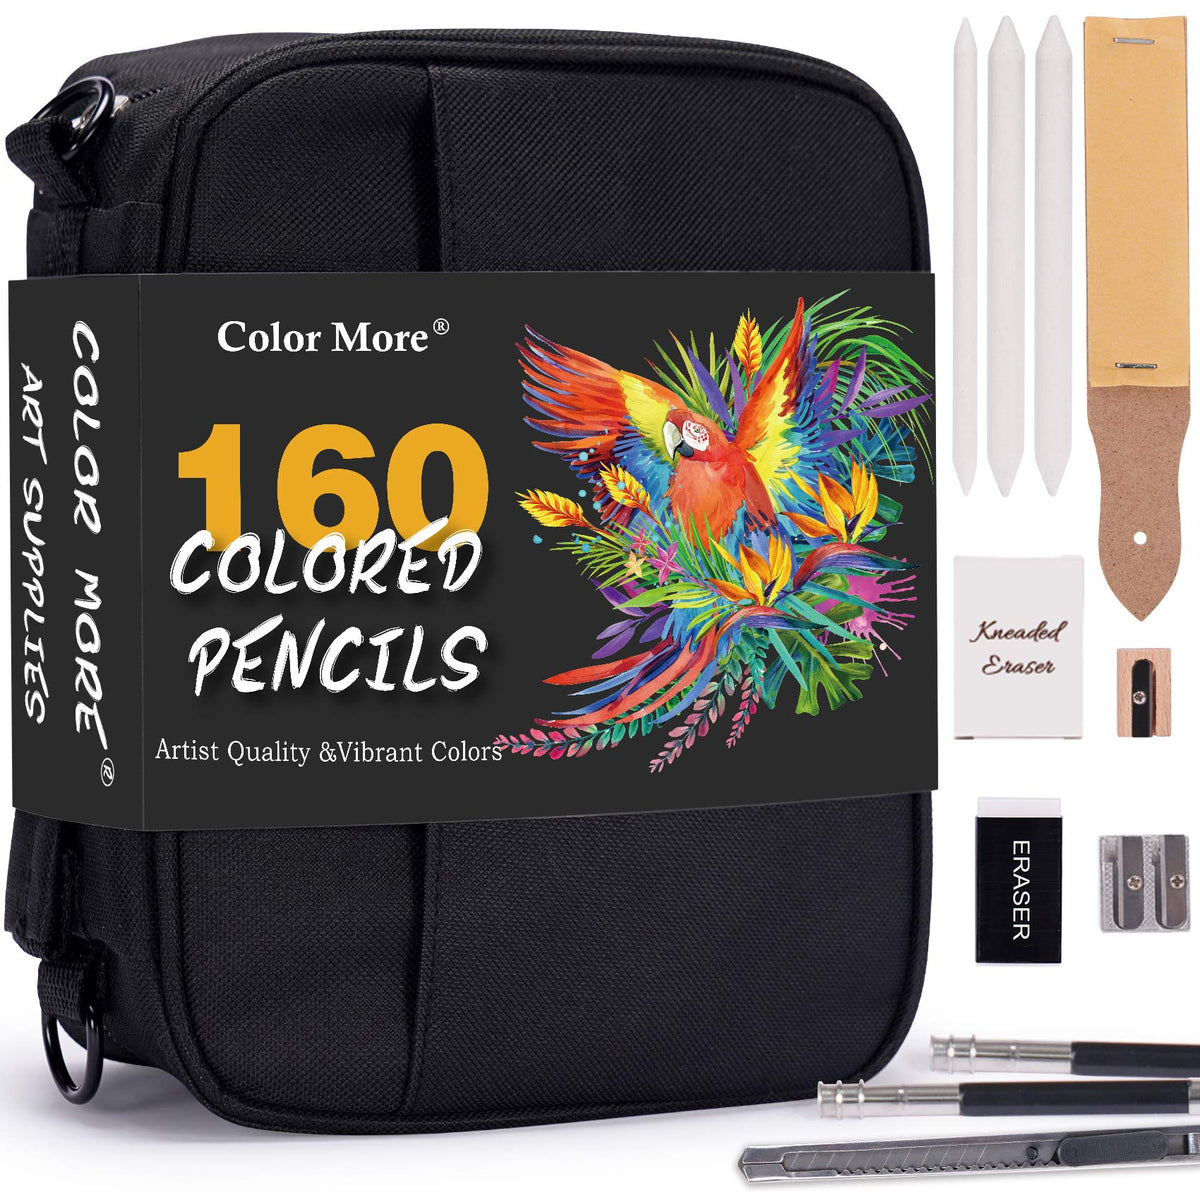 174 Colors Professional Colored Pencils, Shuttle Art Soft Core Coloring Pencils  Set with 1 Coloring Book,1 Sketch Pad, 4 Sharpener, 2 Pencil Extender,  Perfect for Artists Kids Adults Coloring 